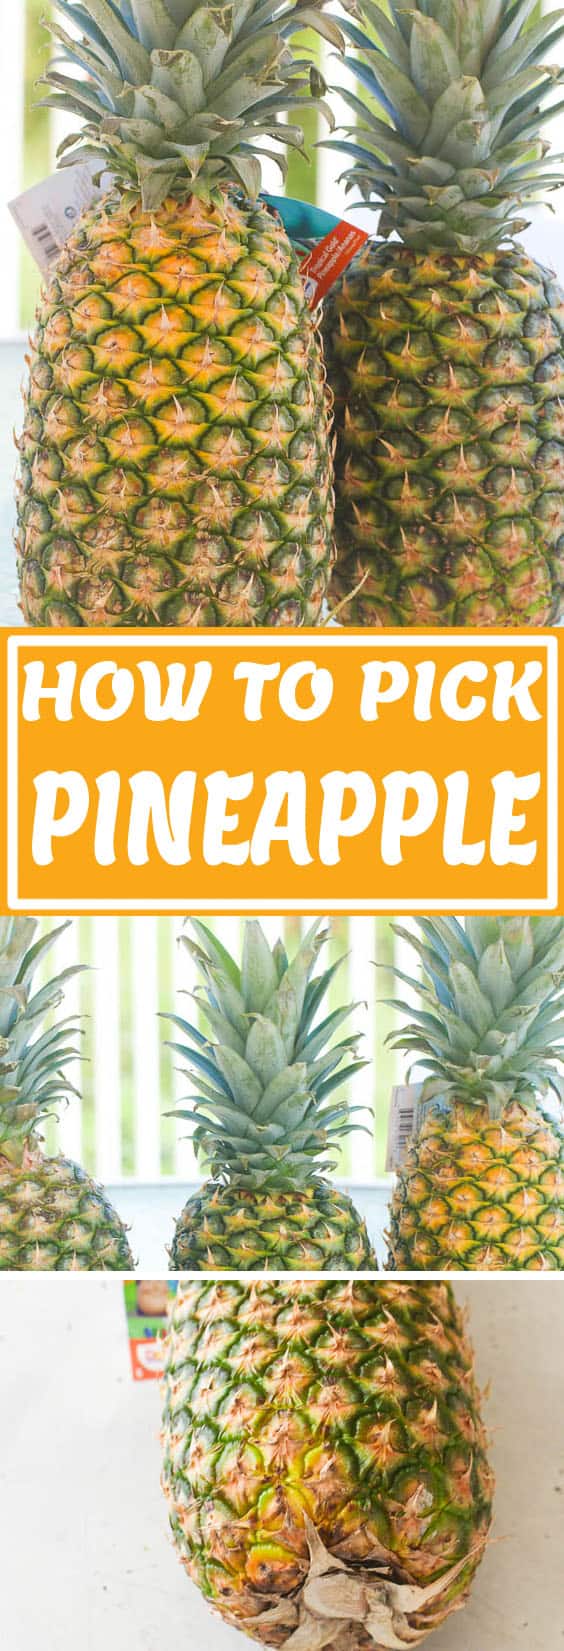 How to Pick Pineapple